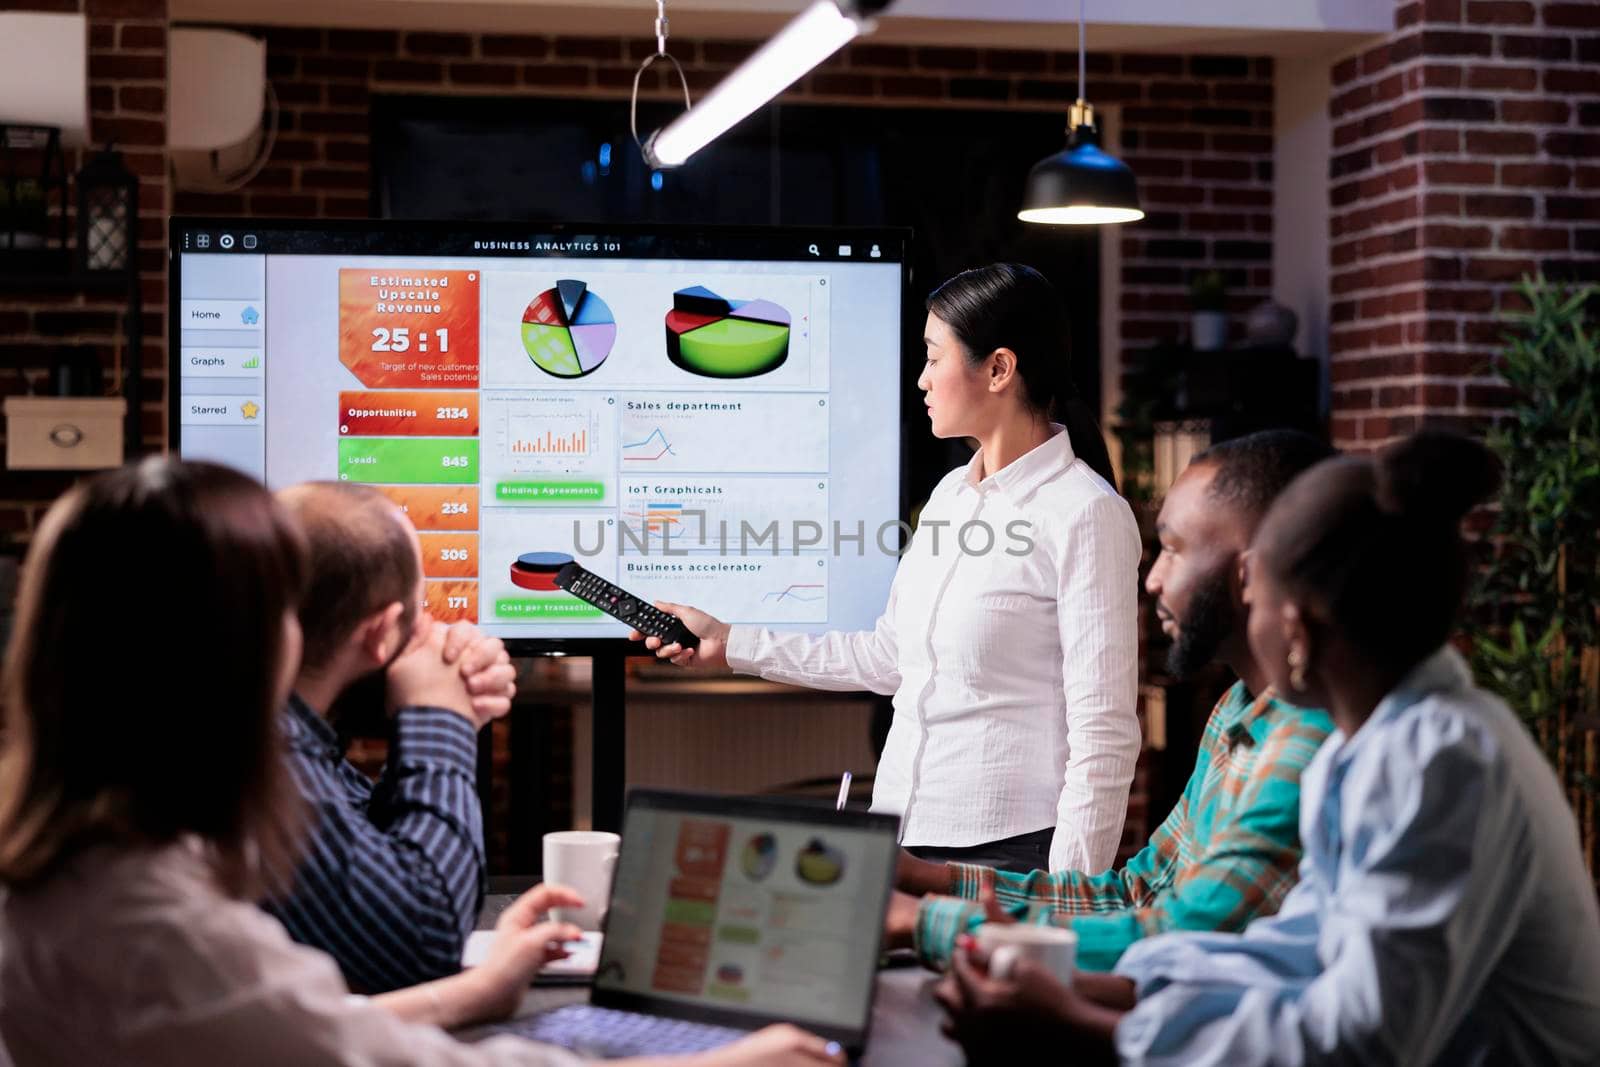 Asian entrepreneur holding remote control presenting business sales statistics on tv screen in late night meeting. Woman workahollic doing overtime at work talking about marketing strategy with diverse team.